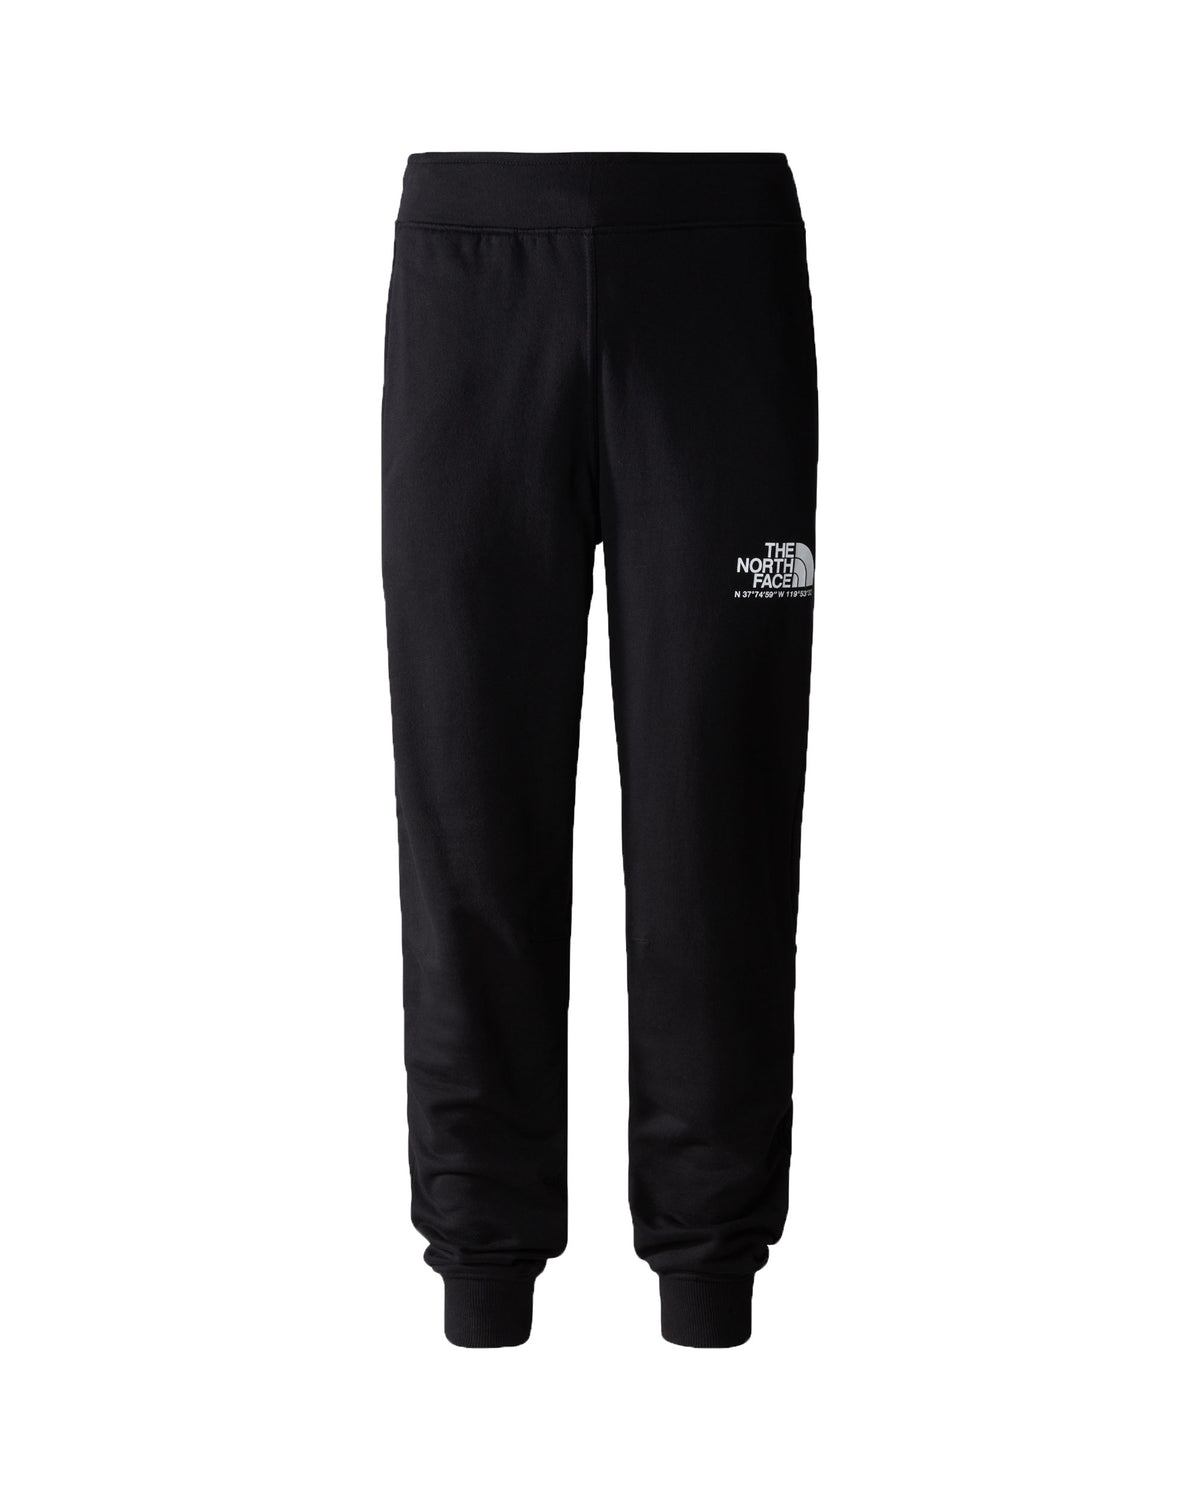 Man Trousers The North Face Coordinates Black